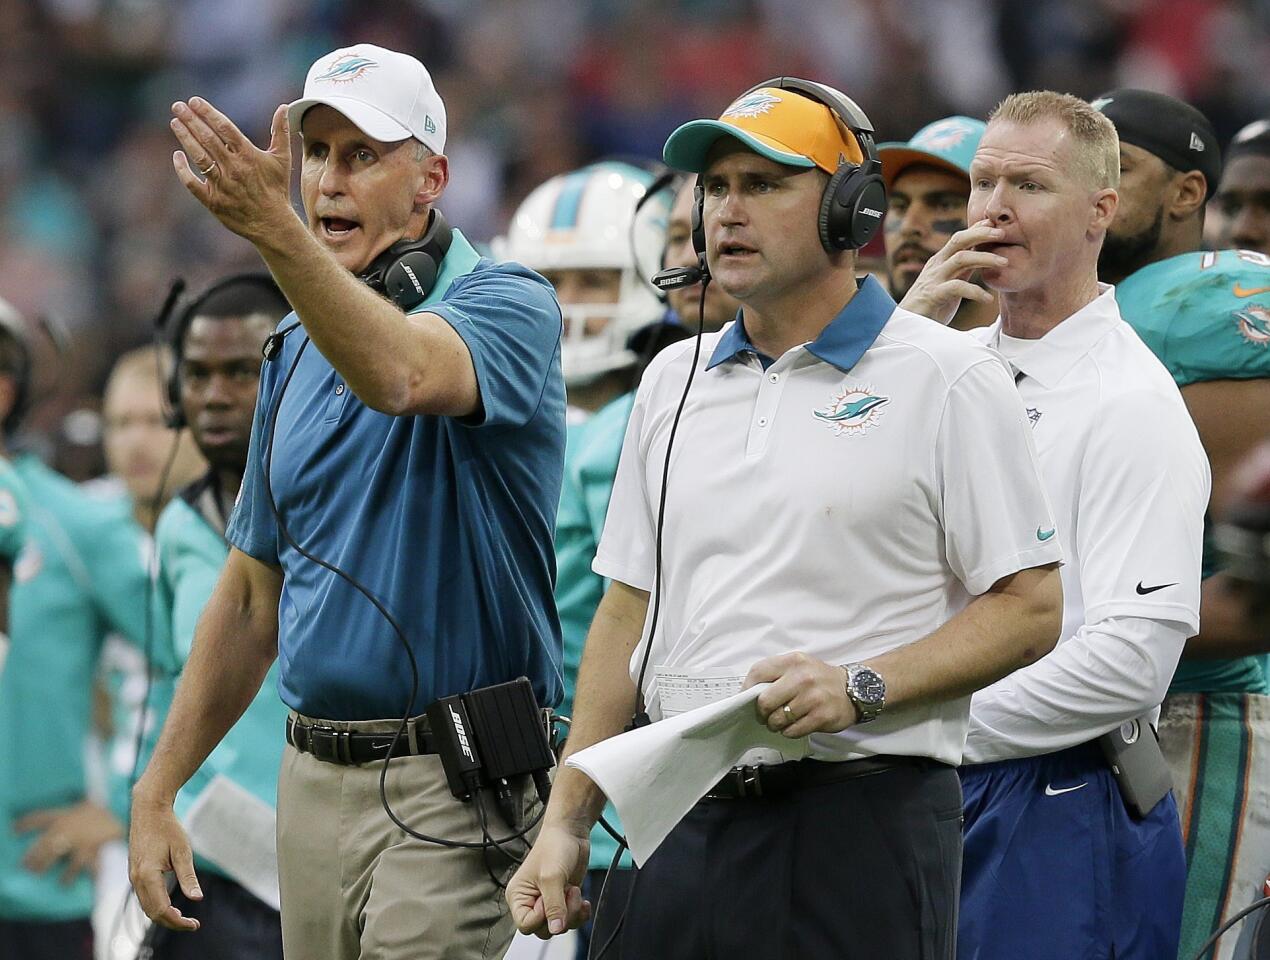 Miami Dolphins head coach Joe Philbin, left, gestures during the NFL football game between the New York Jets and the Miami Dolphins and at Wembley stadium in London, Sunday, Oct. 4, 2015. (AP Photo/Tim Ireland) ORG XMIT: WEM185